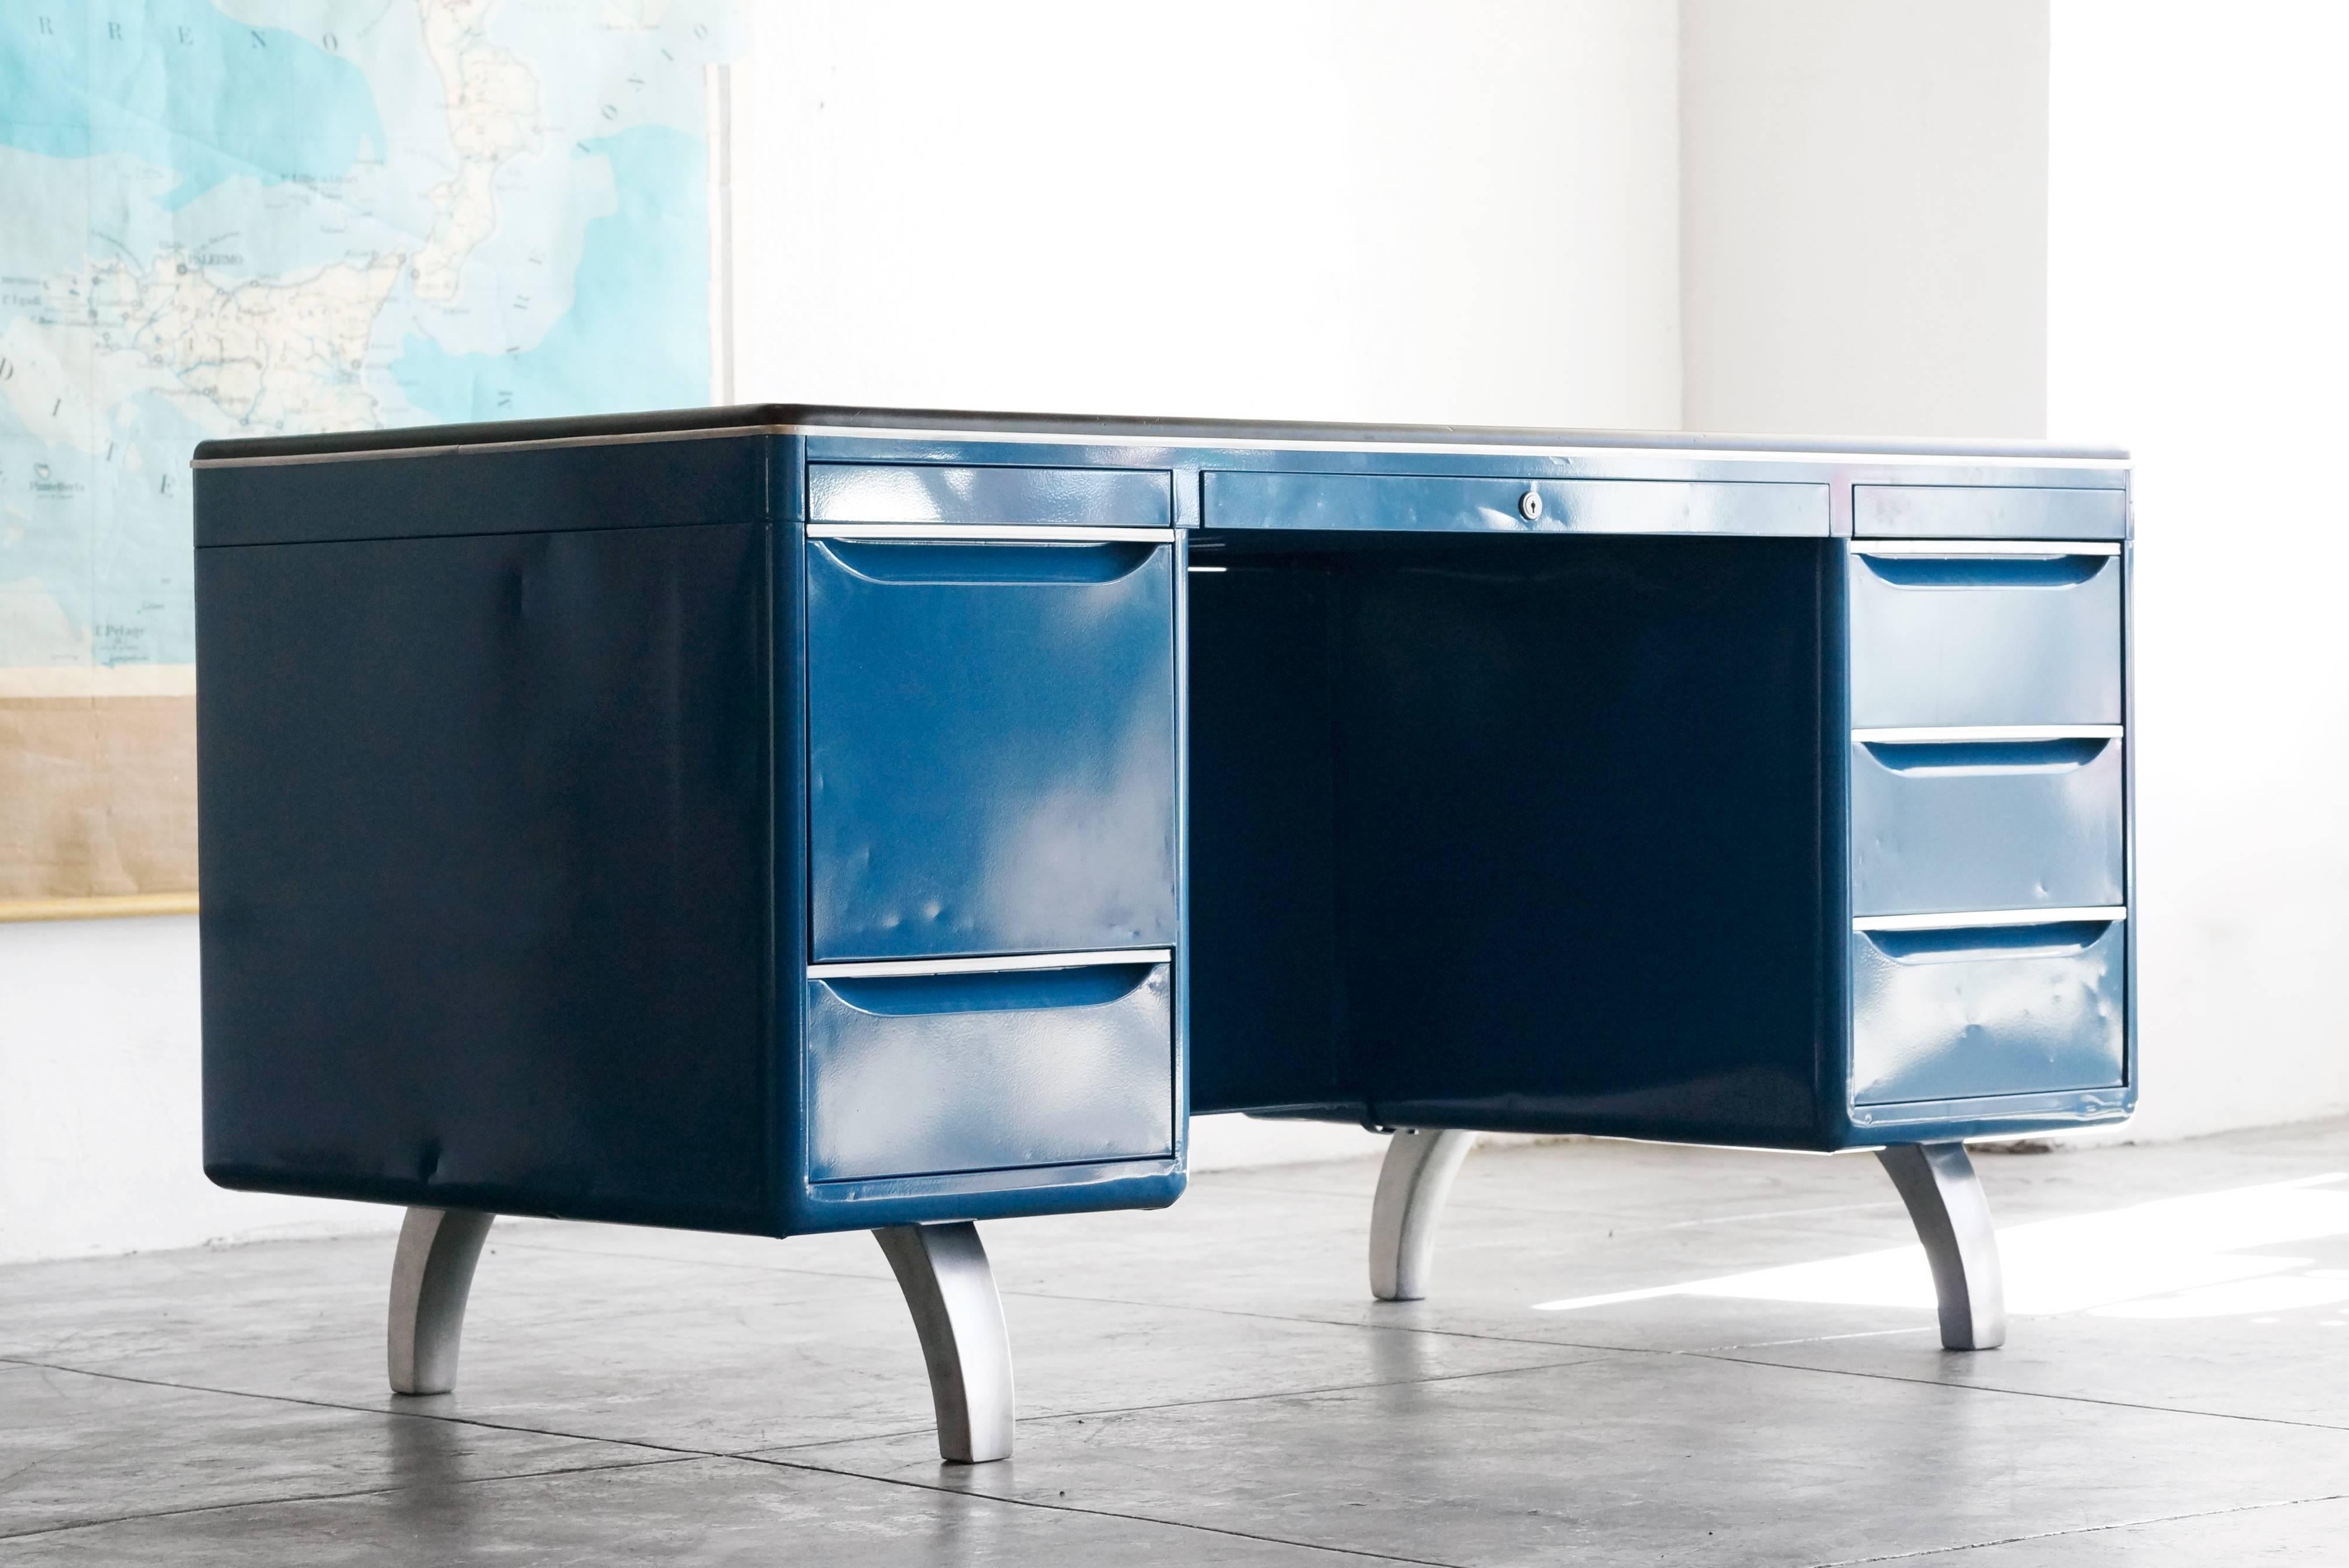 Rare double pedestal Mode Maker, the iconic tanker desk designed by Raymond Loewy for General Fireproofing Co. Newly refinished in Moon Blue with a black linoleum top. Brushed aluminum hardware. Features ample storage space, filing and utility